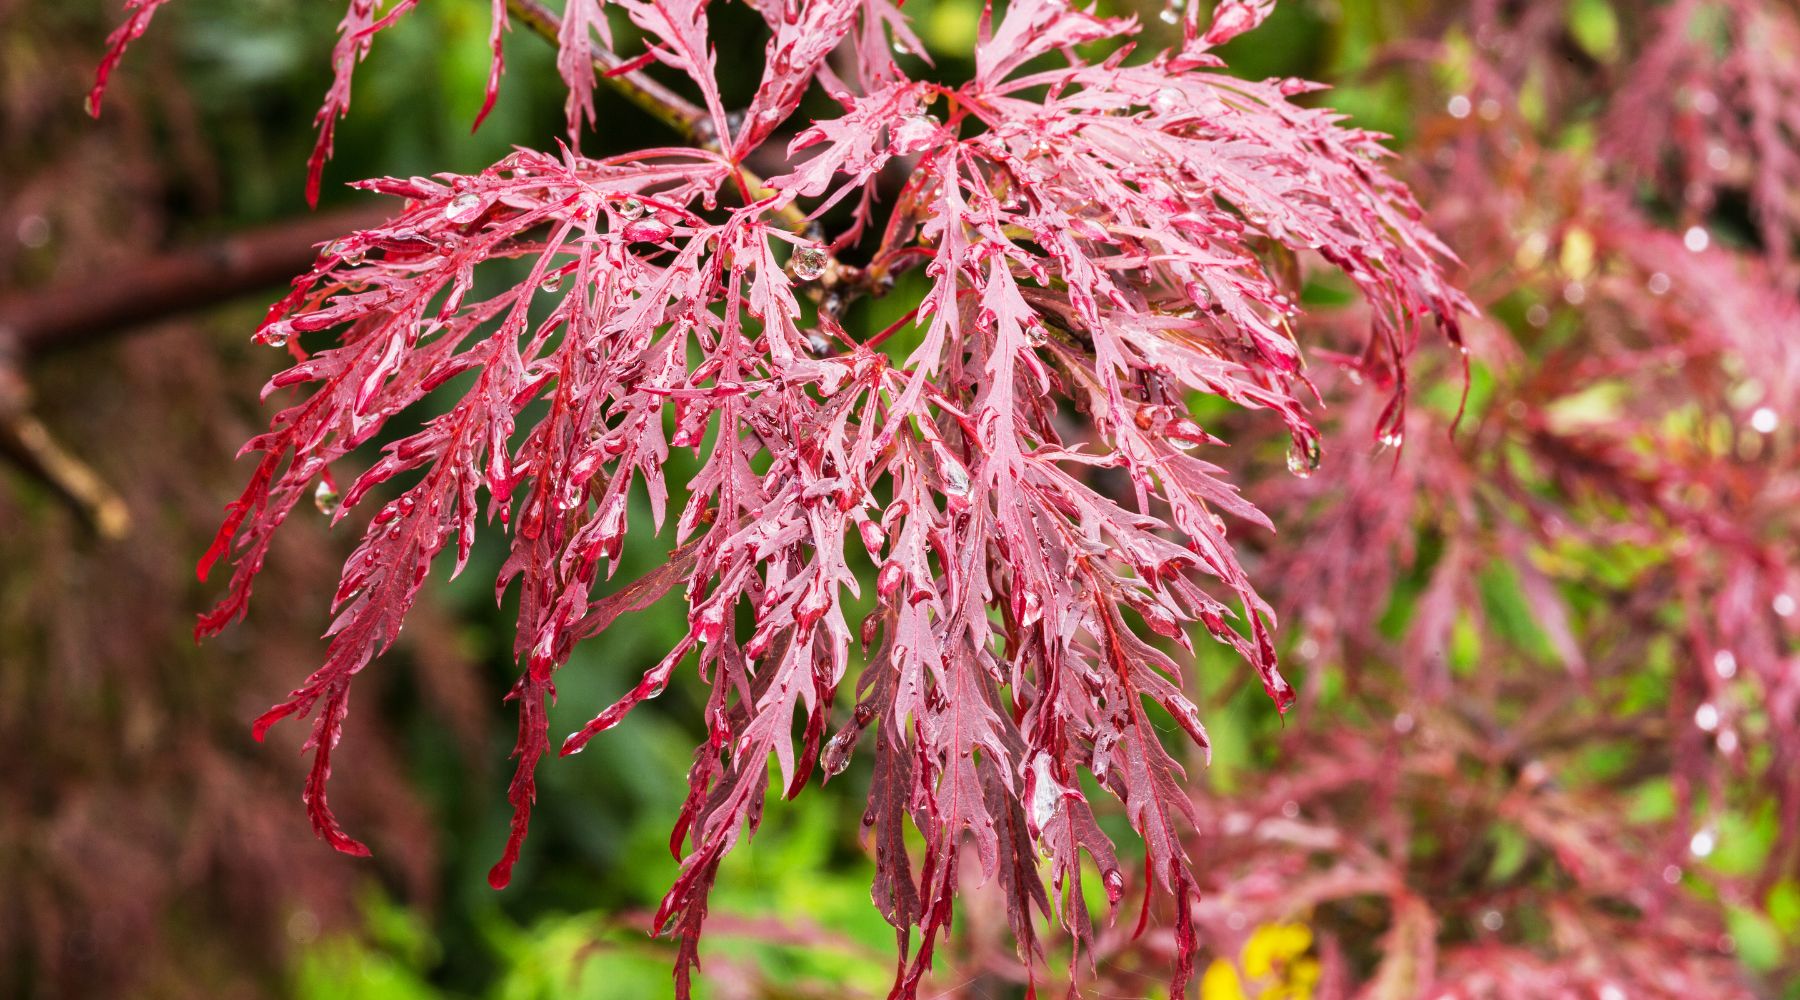 Japanese maple - one of the smallest trees in the world